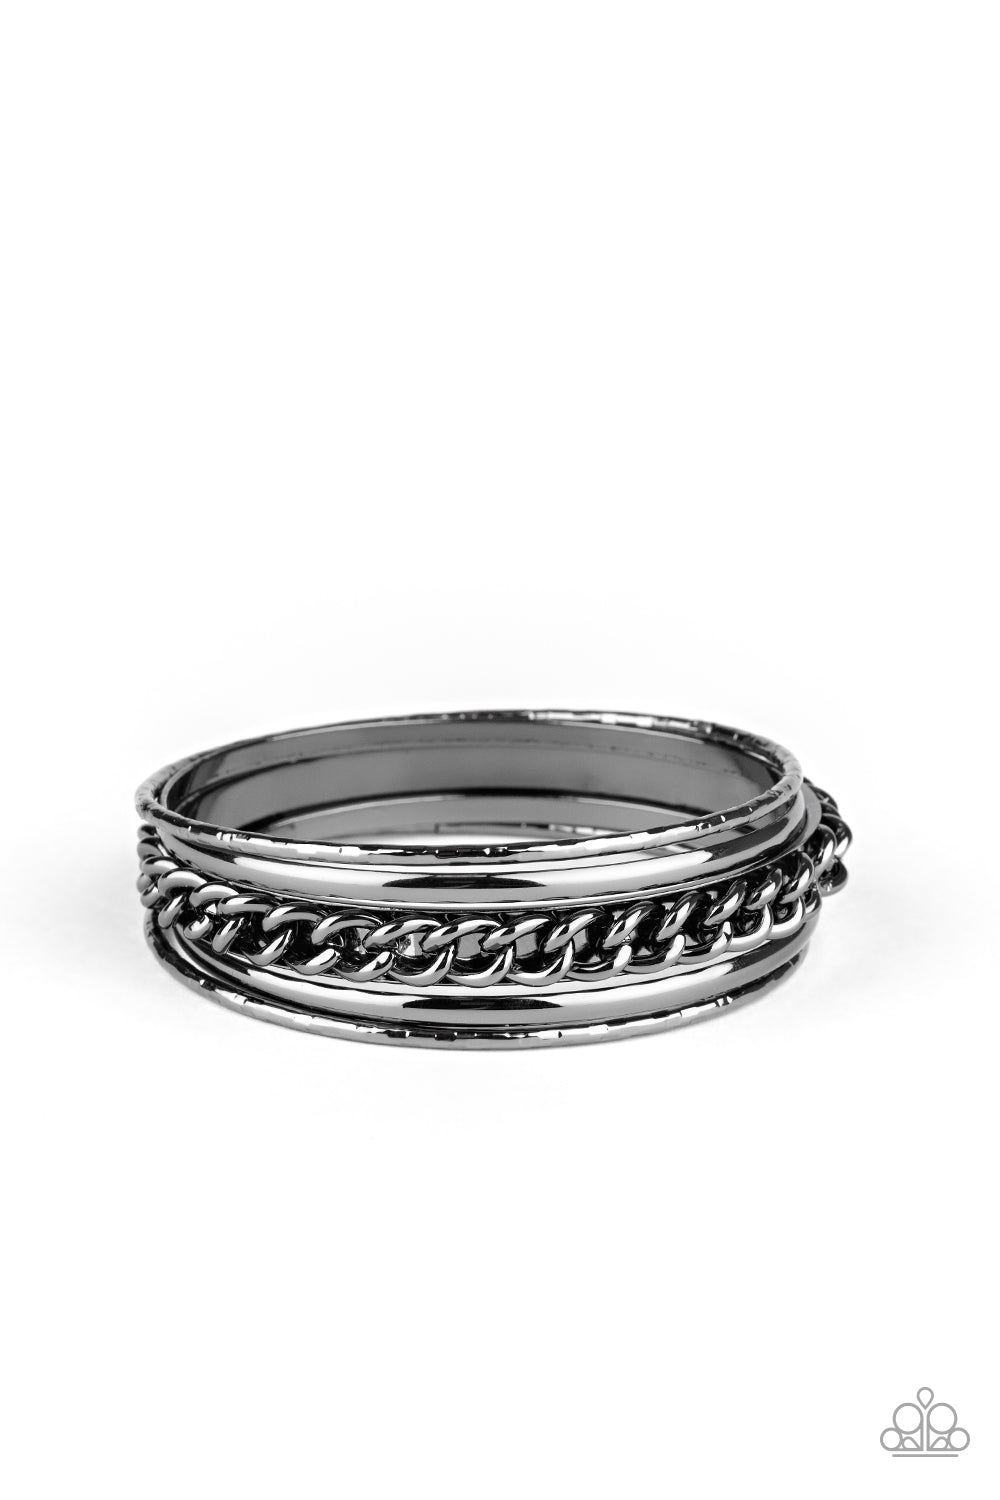 &lt;P&gt;Pairs of smooth and textured gunmetal bangles join an antiqued bangle around the wrist that is decorated in a single strand of gunmetal chain for a gritty finish.
  &lt;/P&gt;

&lt;P&gt;&lt;I&gt; Sold as one set of five bracelets.  &lt;/I&gt;&lt;/p&gt;


&lt;img src=\&quot;https://d9b54x484lq62.cloudfront.net/paparazzi/shopping/images/517_tag150x115_1.png\&quot; alt=\&quot;New Kit\&quot; align=\&quot;middle\&quot; height=\&quot;50\&quot; width=\&quot;50\&quot;/&gt;